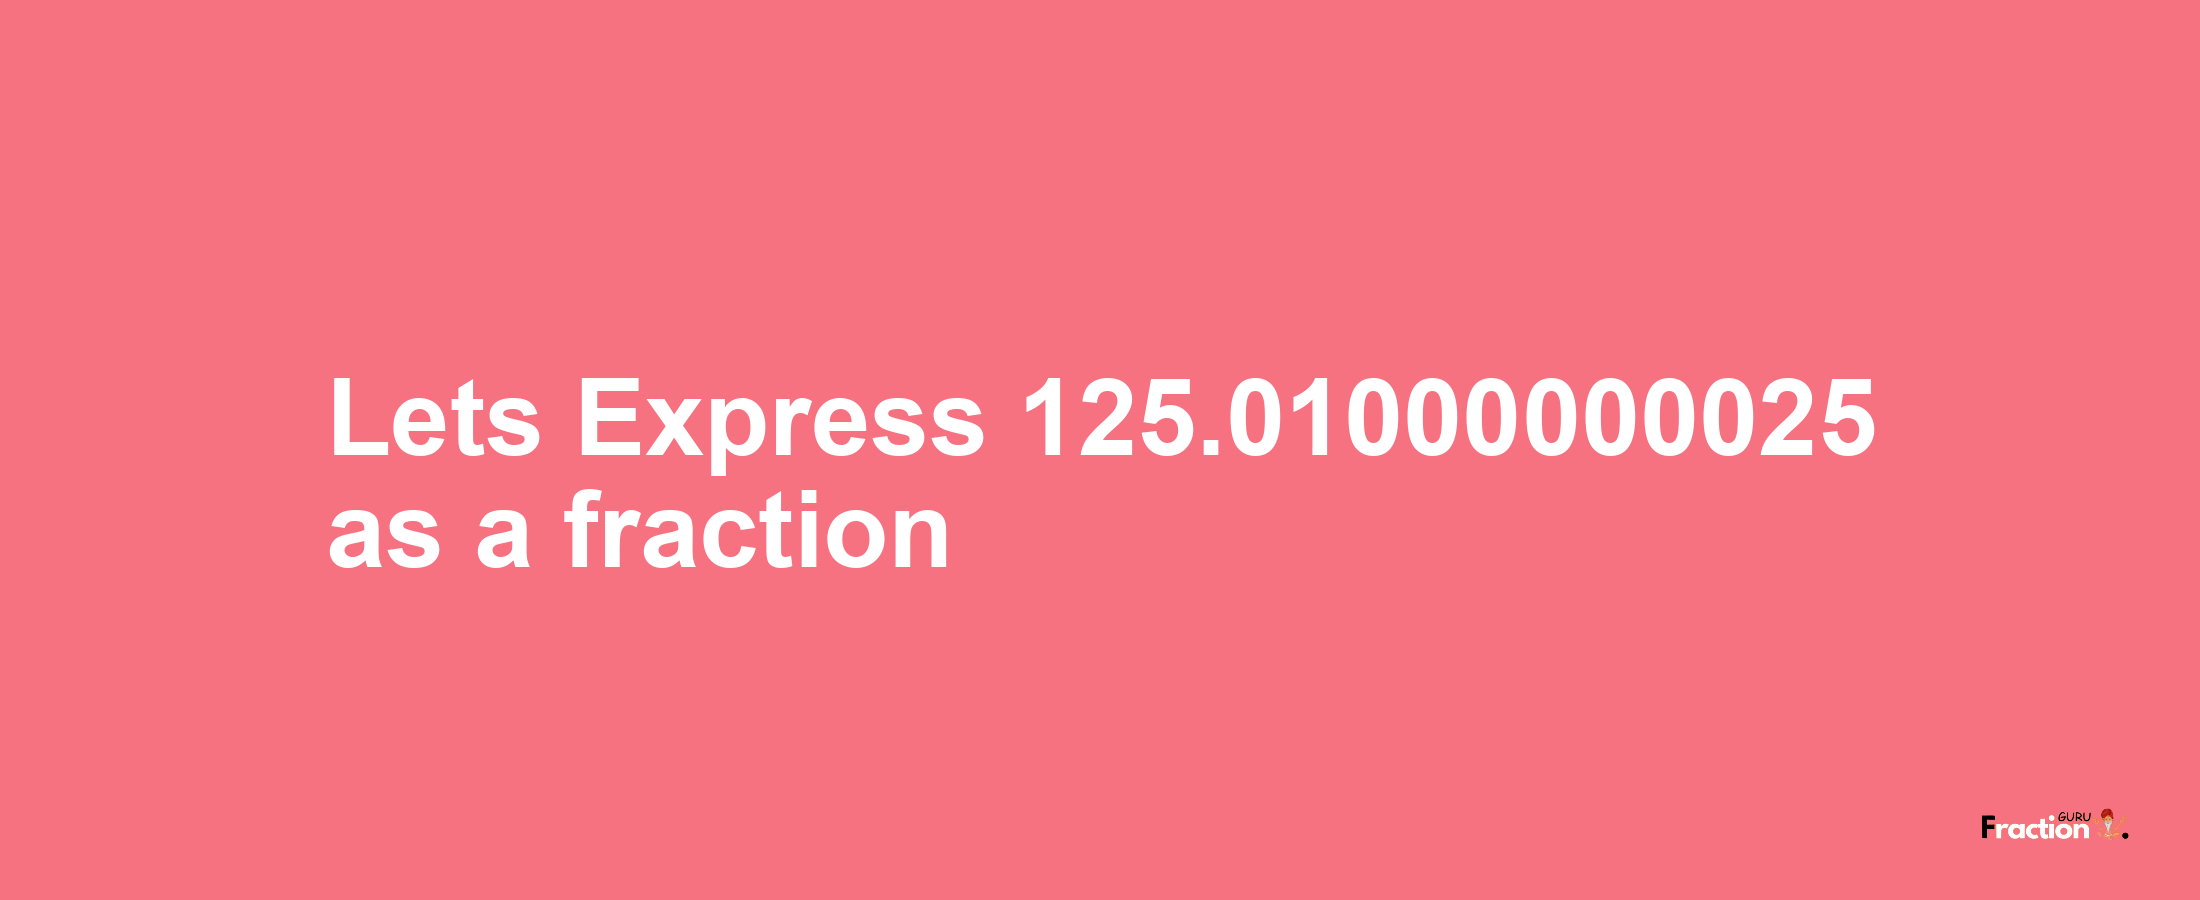 Lets Express 125.01000000025 as afraction